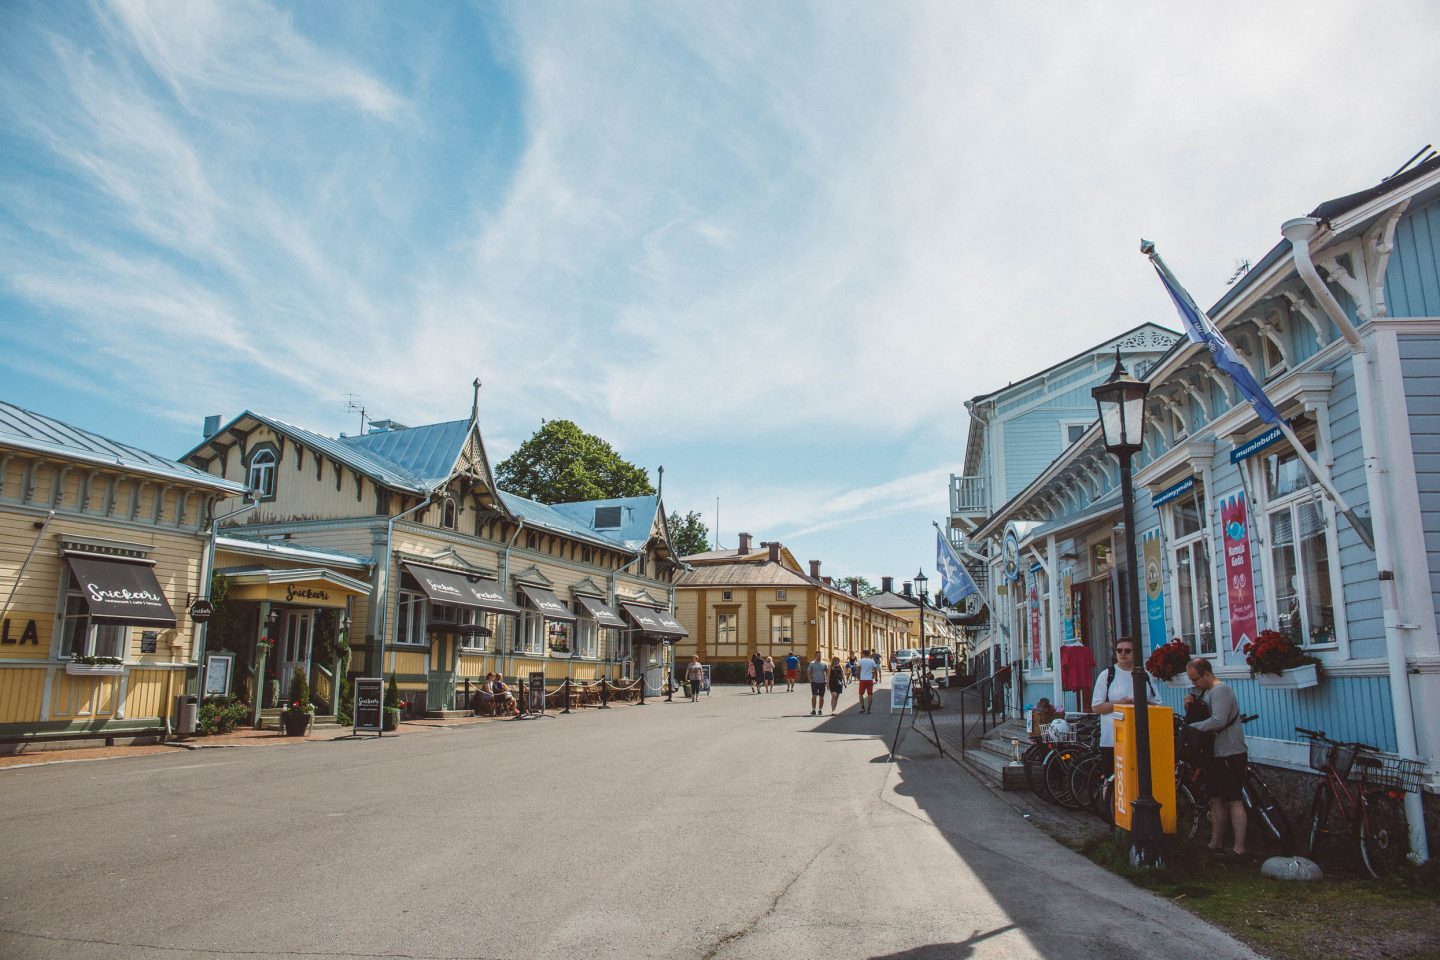 Places to stay: Naantali